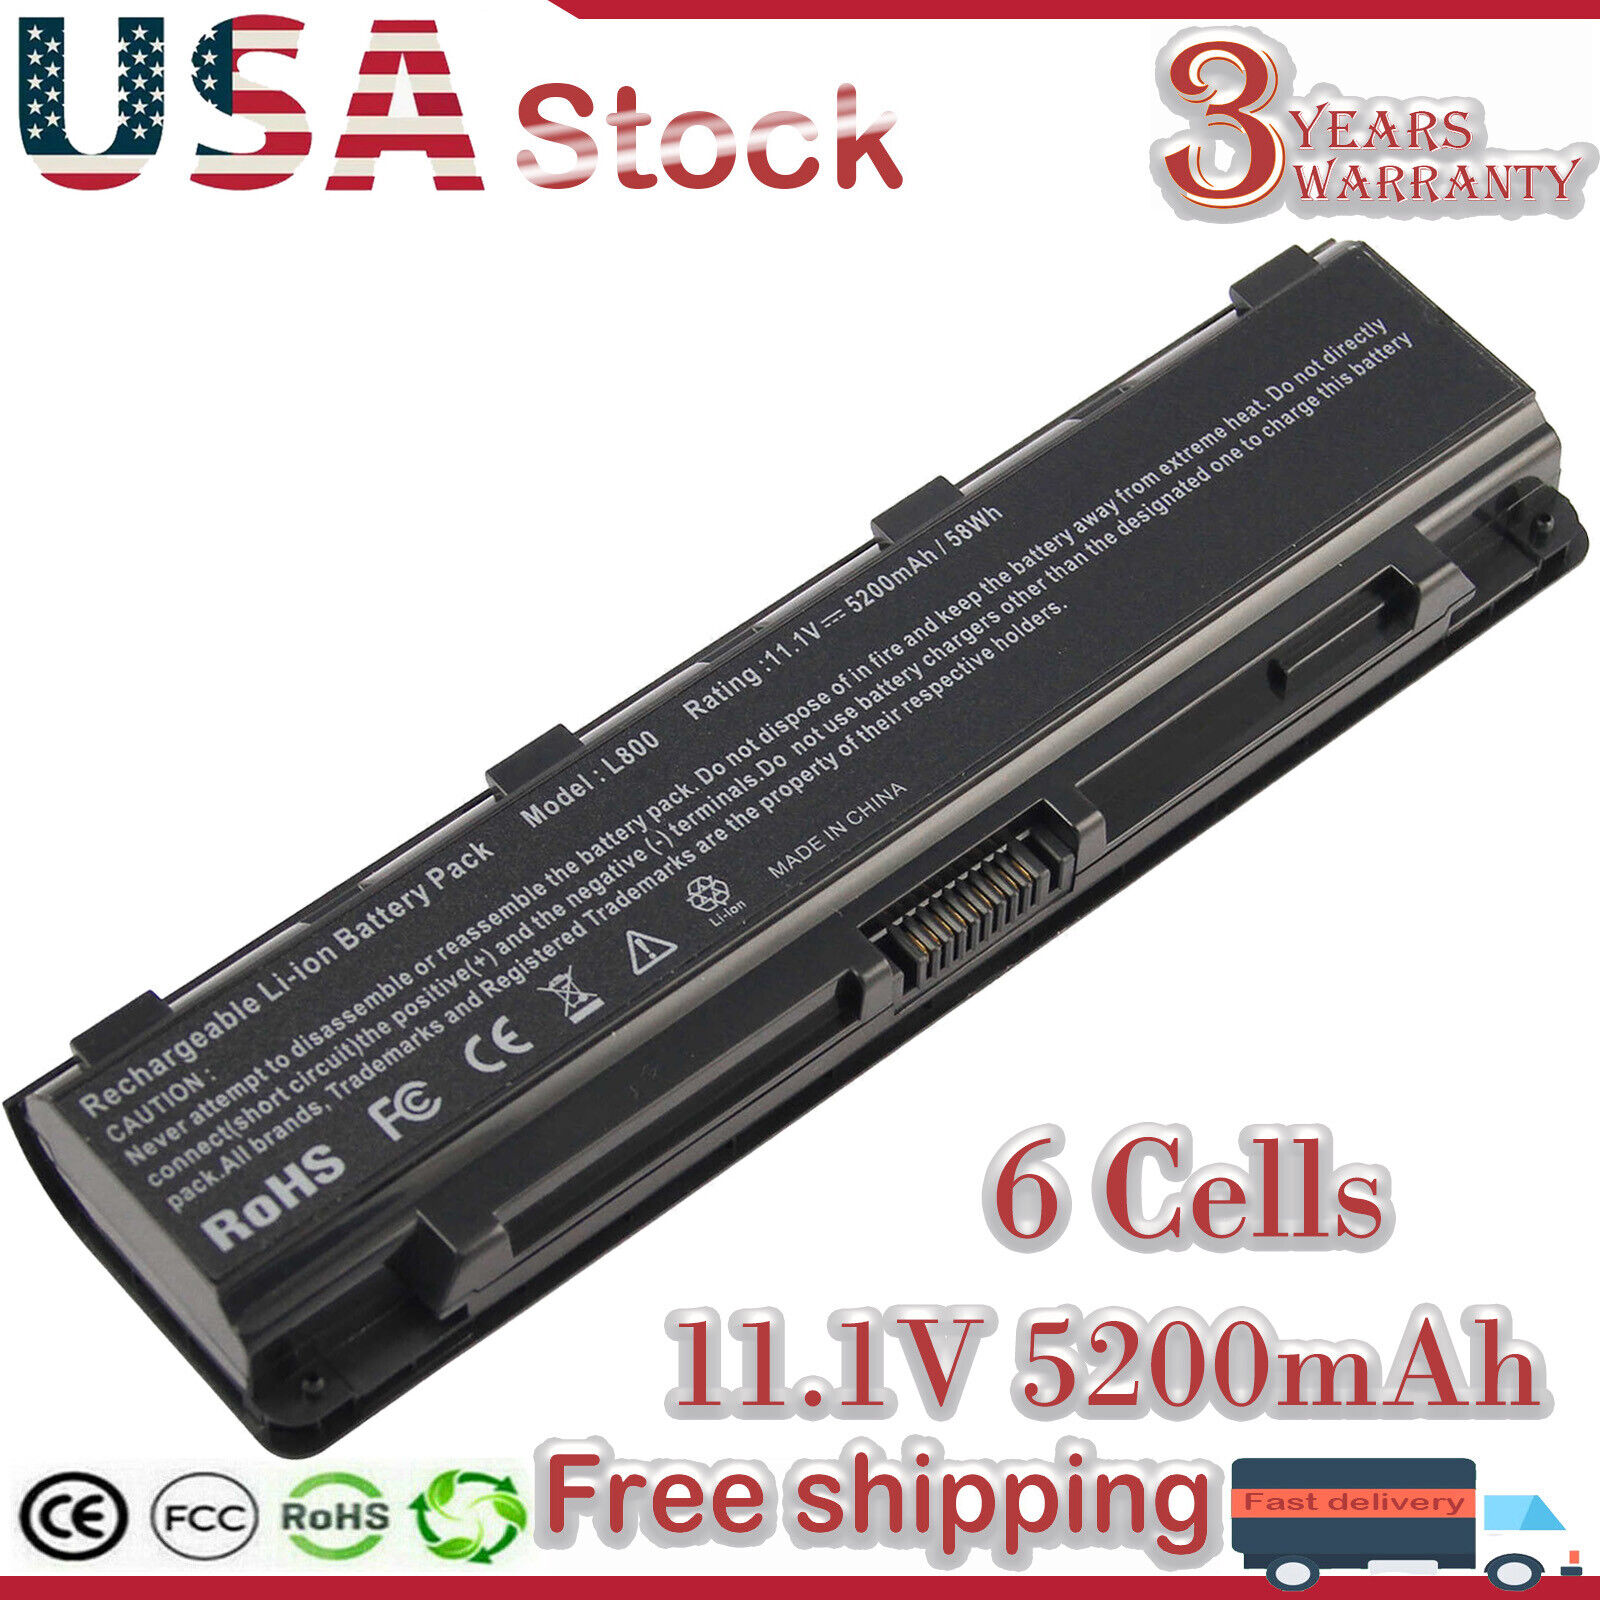 Laptop Battery For Toshiba Satellite C55-A5245 C55T-A5222 C55T-A5102 C55T-A5123 